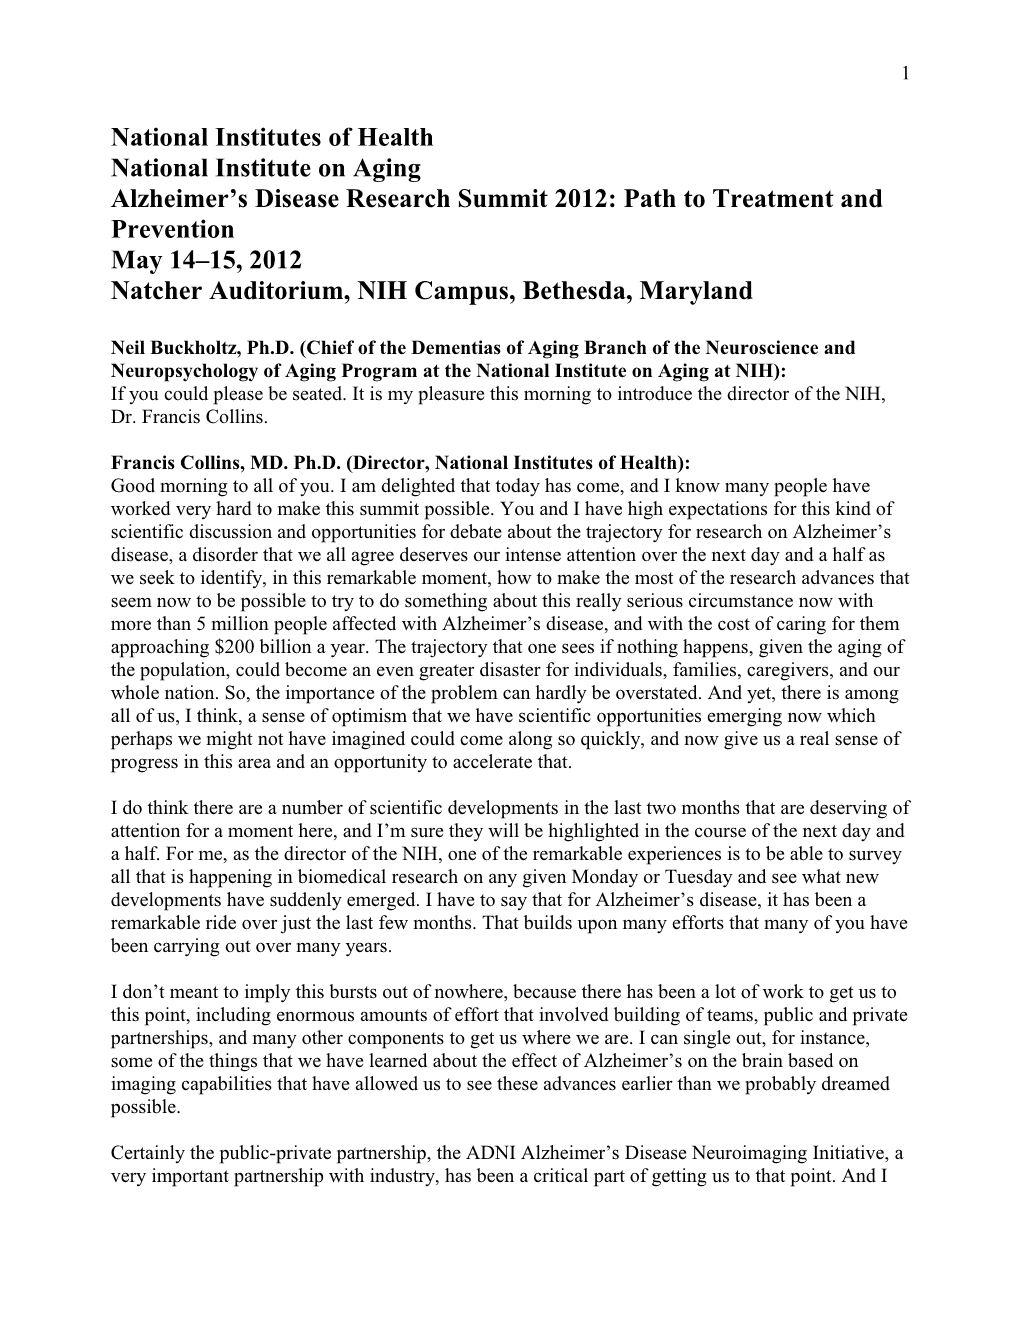 Transcript: Alzheimer S Disease Research Summit 2012: Path to Treatment and Prevention - May 14